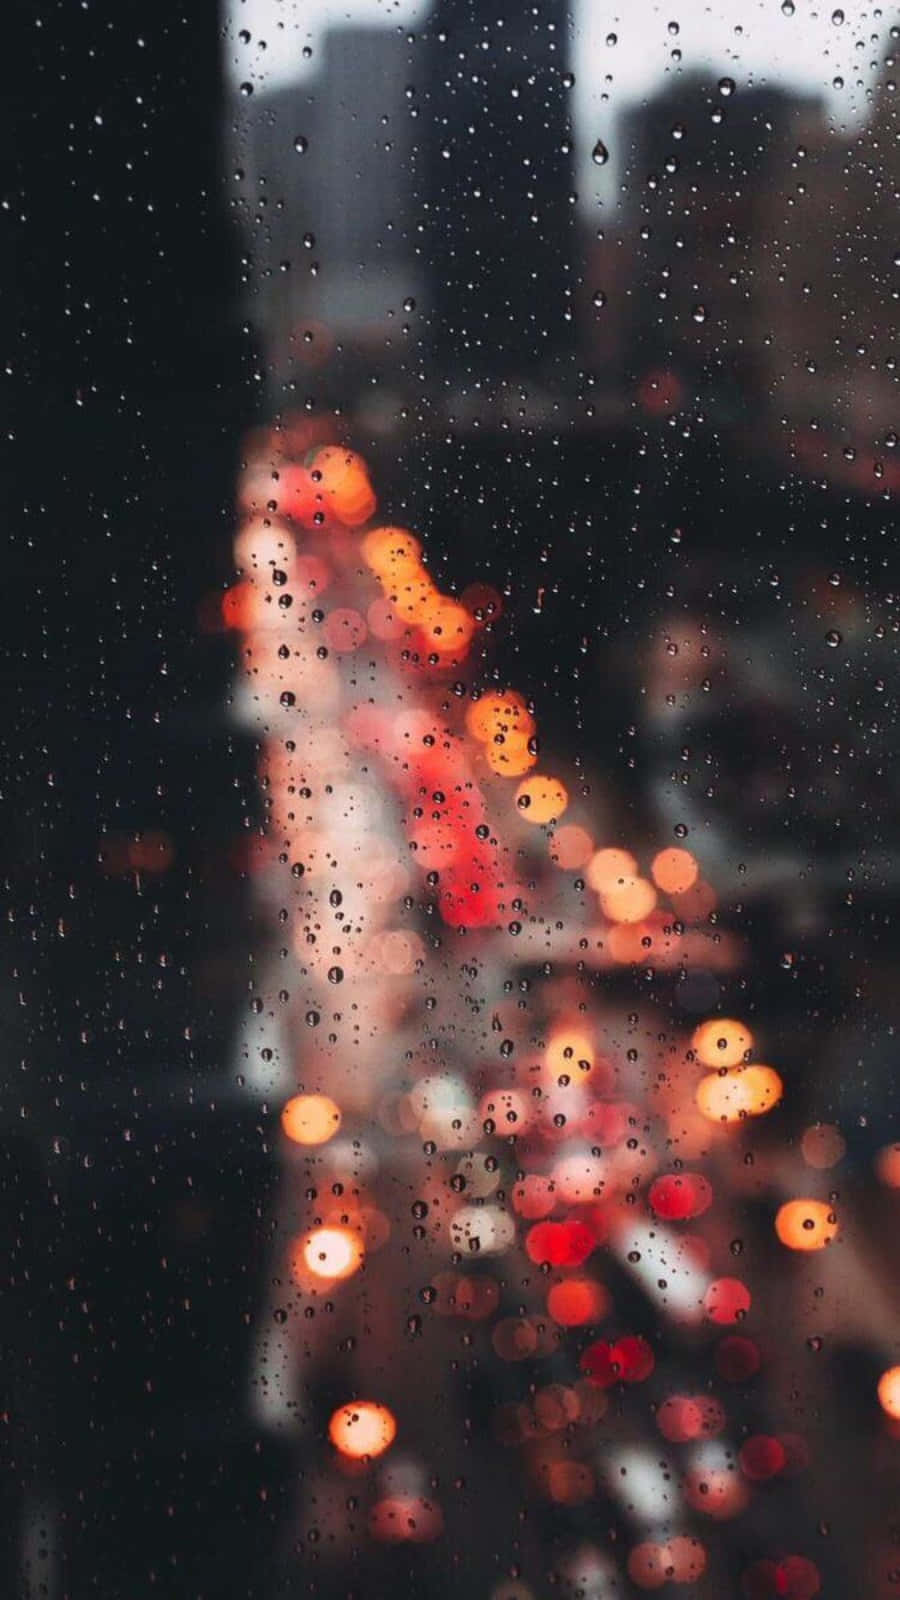 A view of traffic from the window on rainy night - Rain, blurry